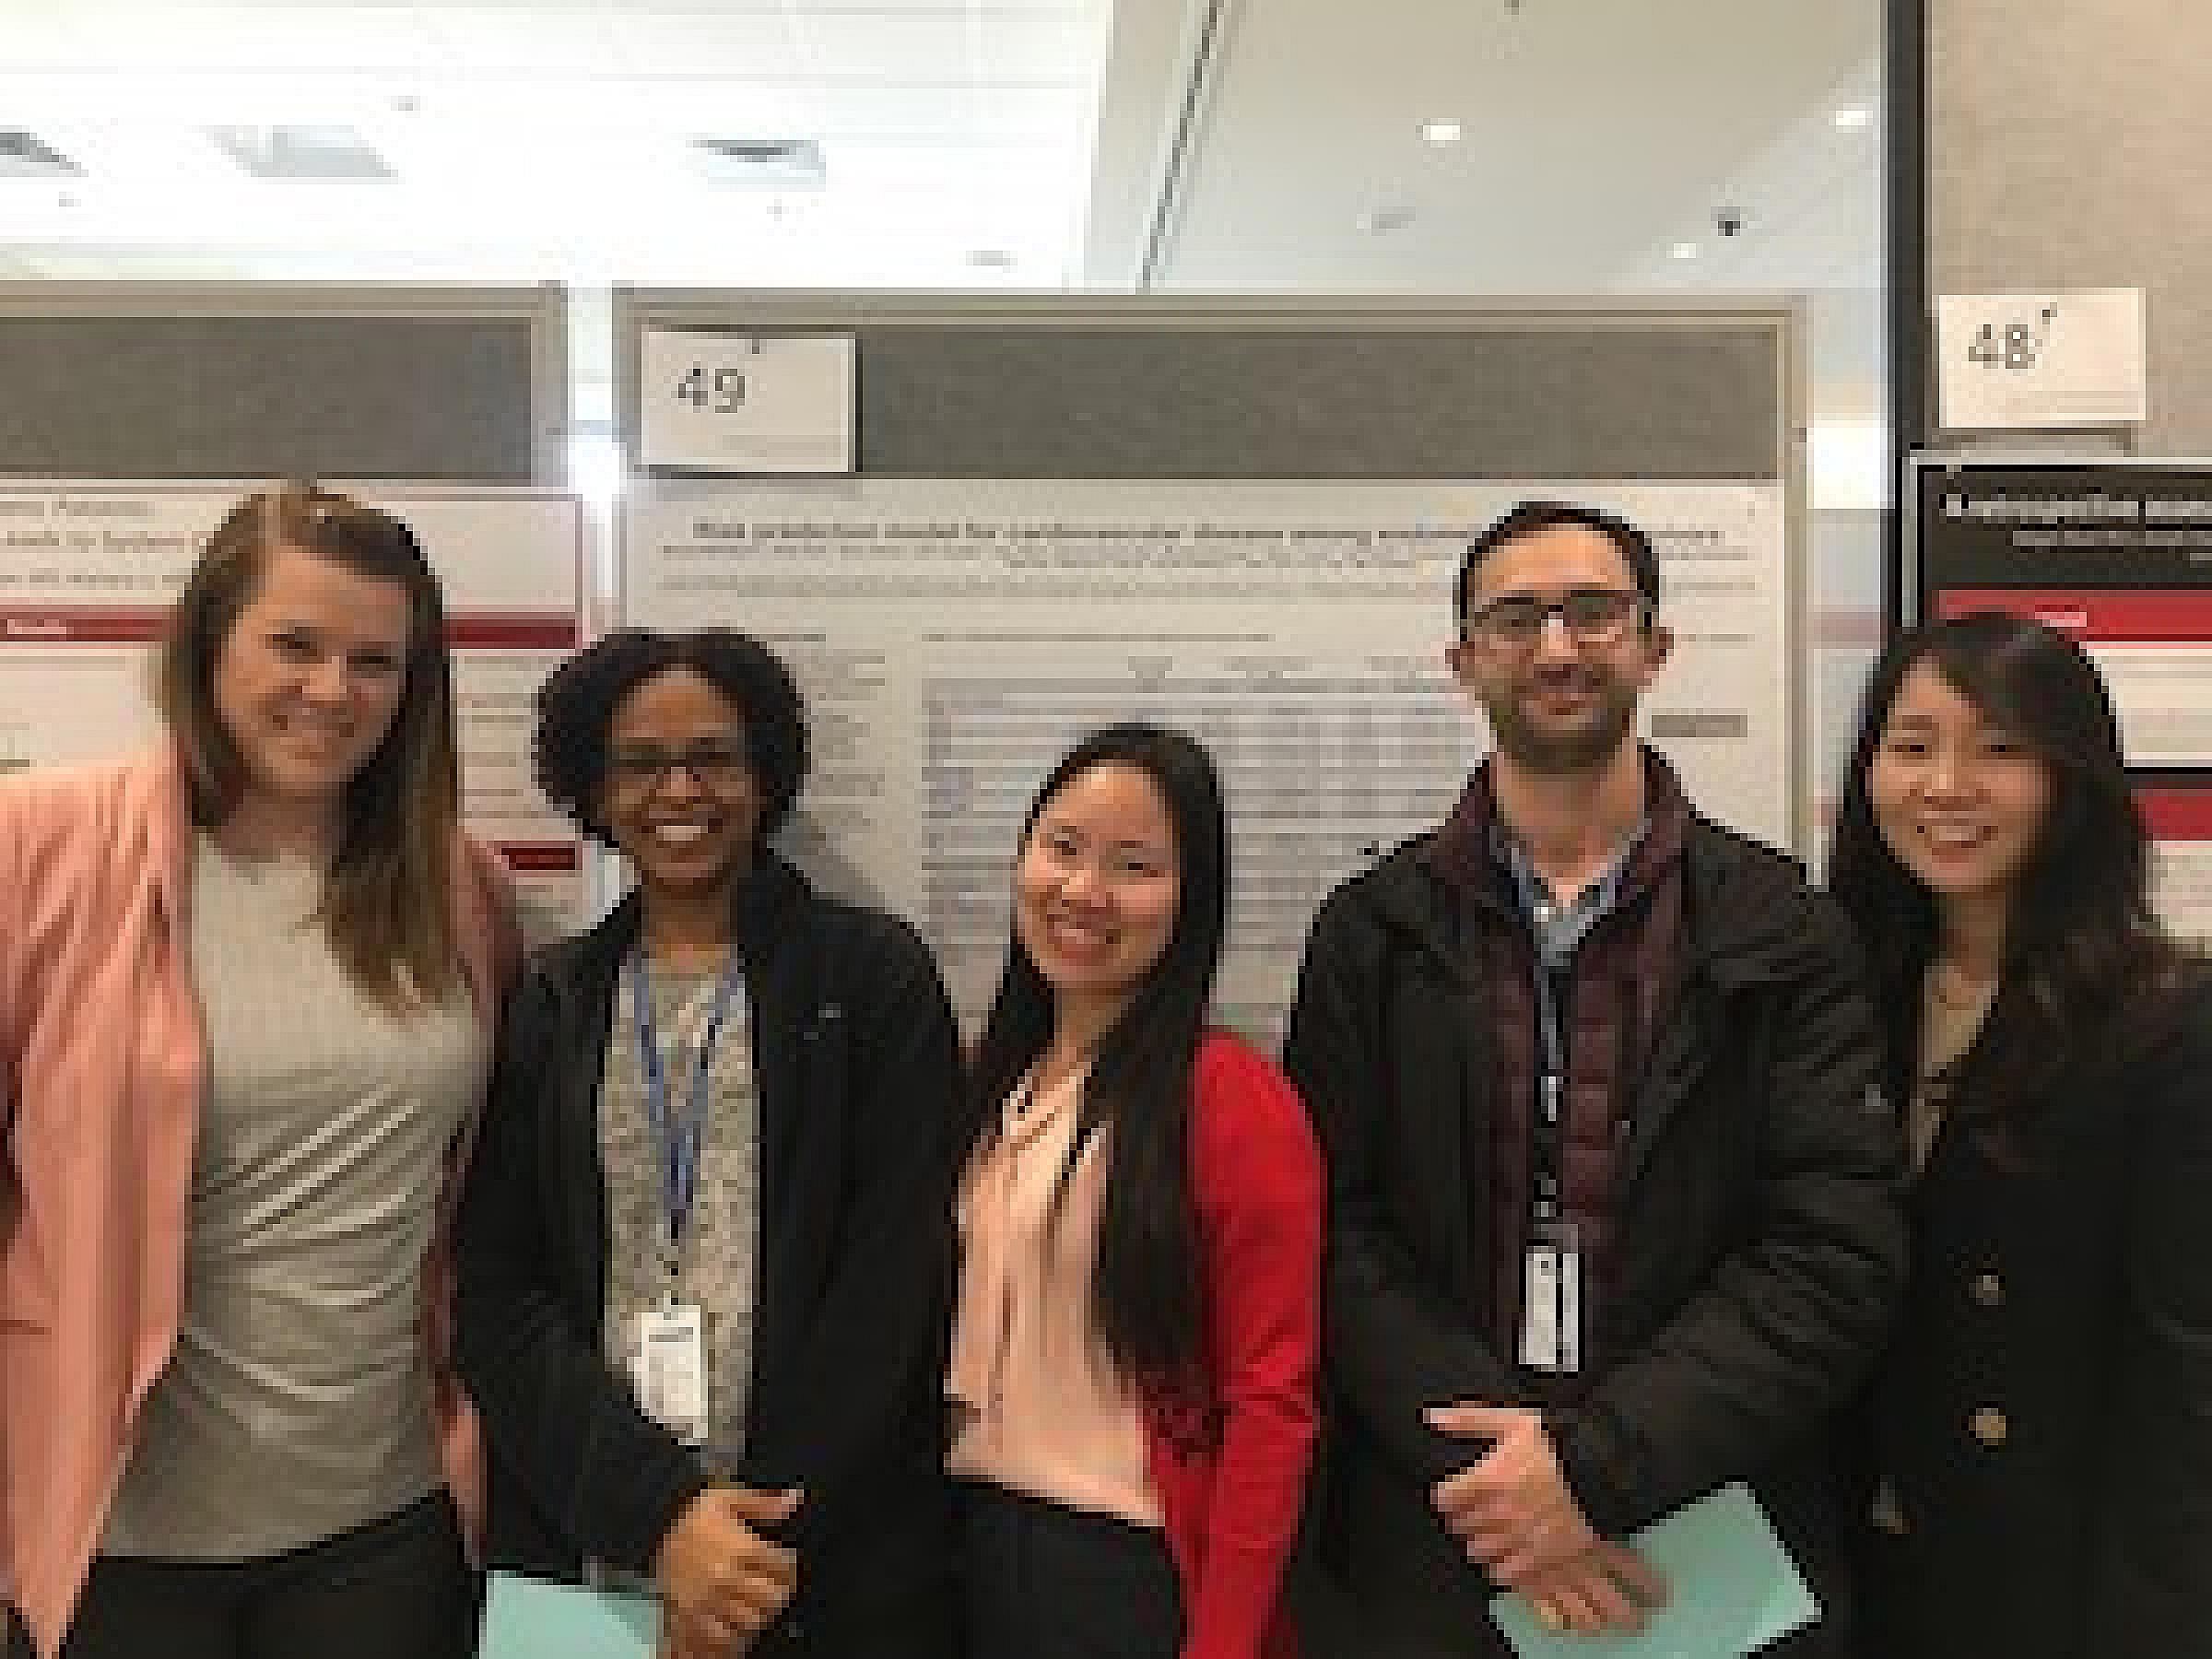 Brenna Blackburn, Esther Chang, Qingqing Hu, Seungmin Kim, and Krista Ocier presented their posters at the Department of Family and Preventive Medicine Poster Summit.